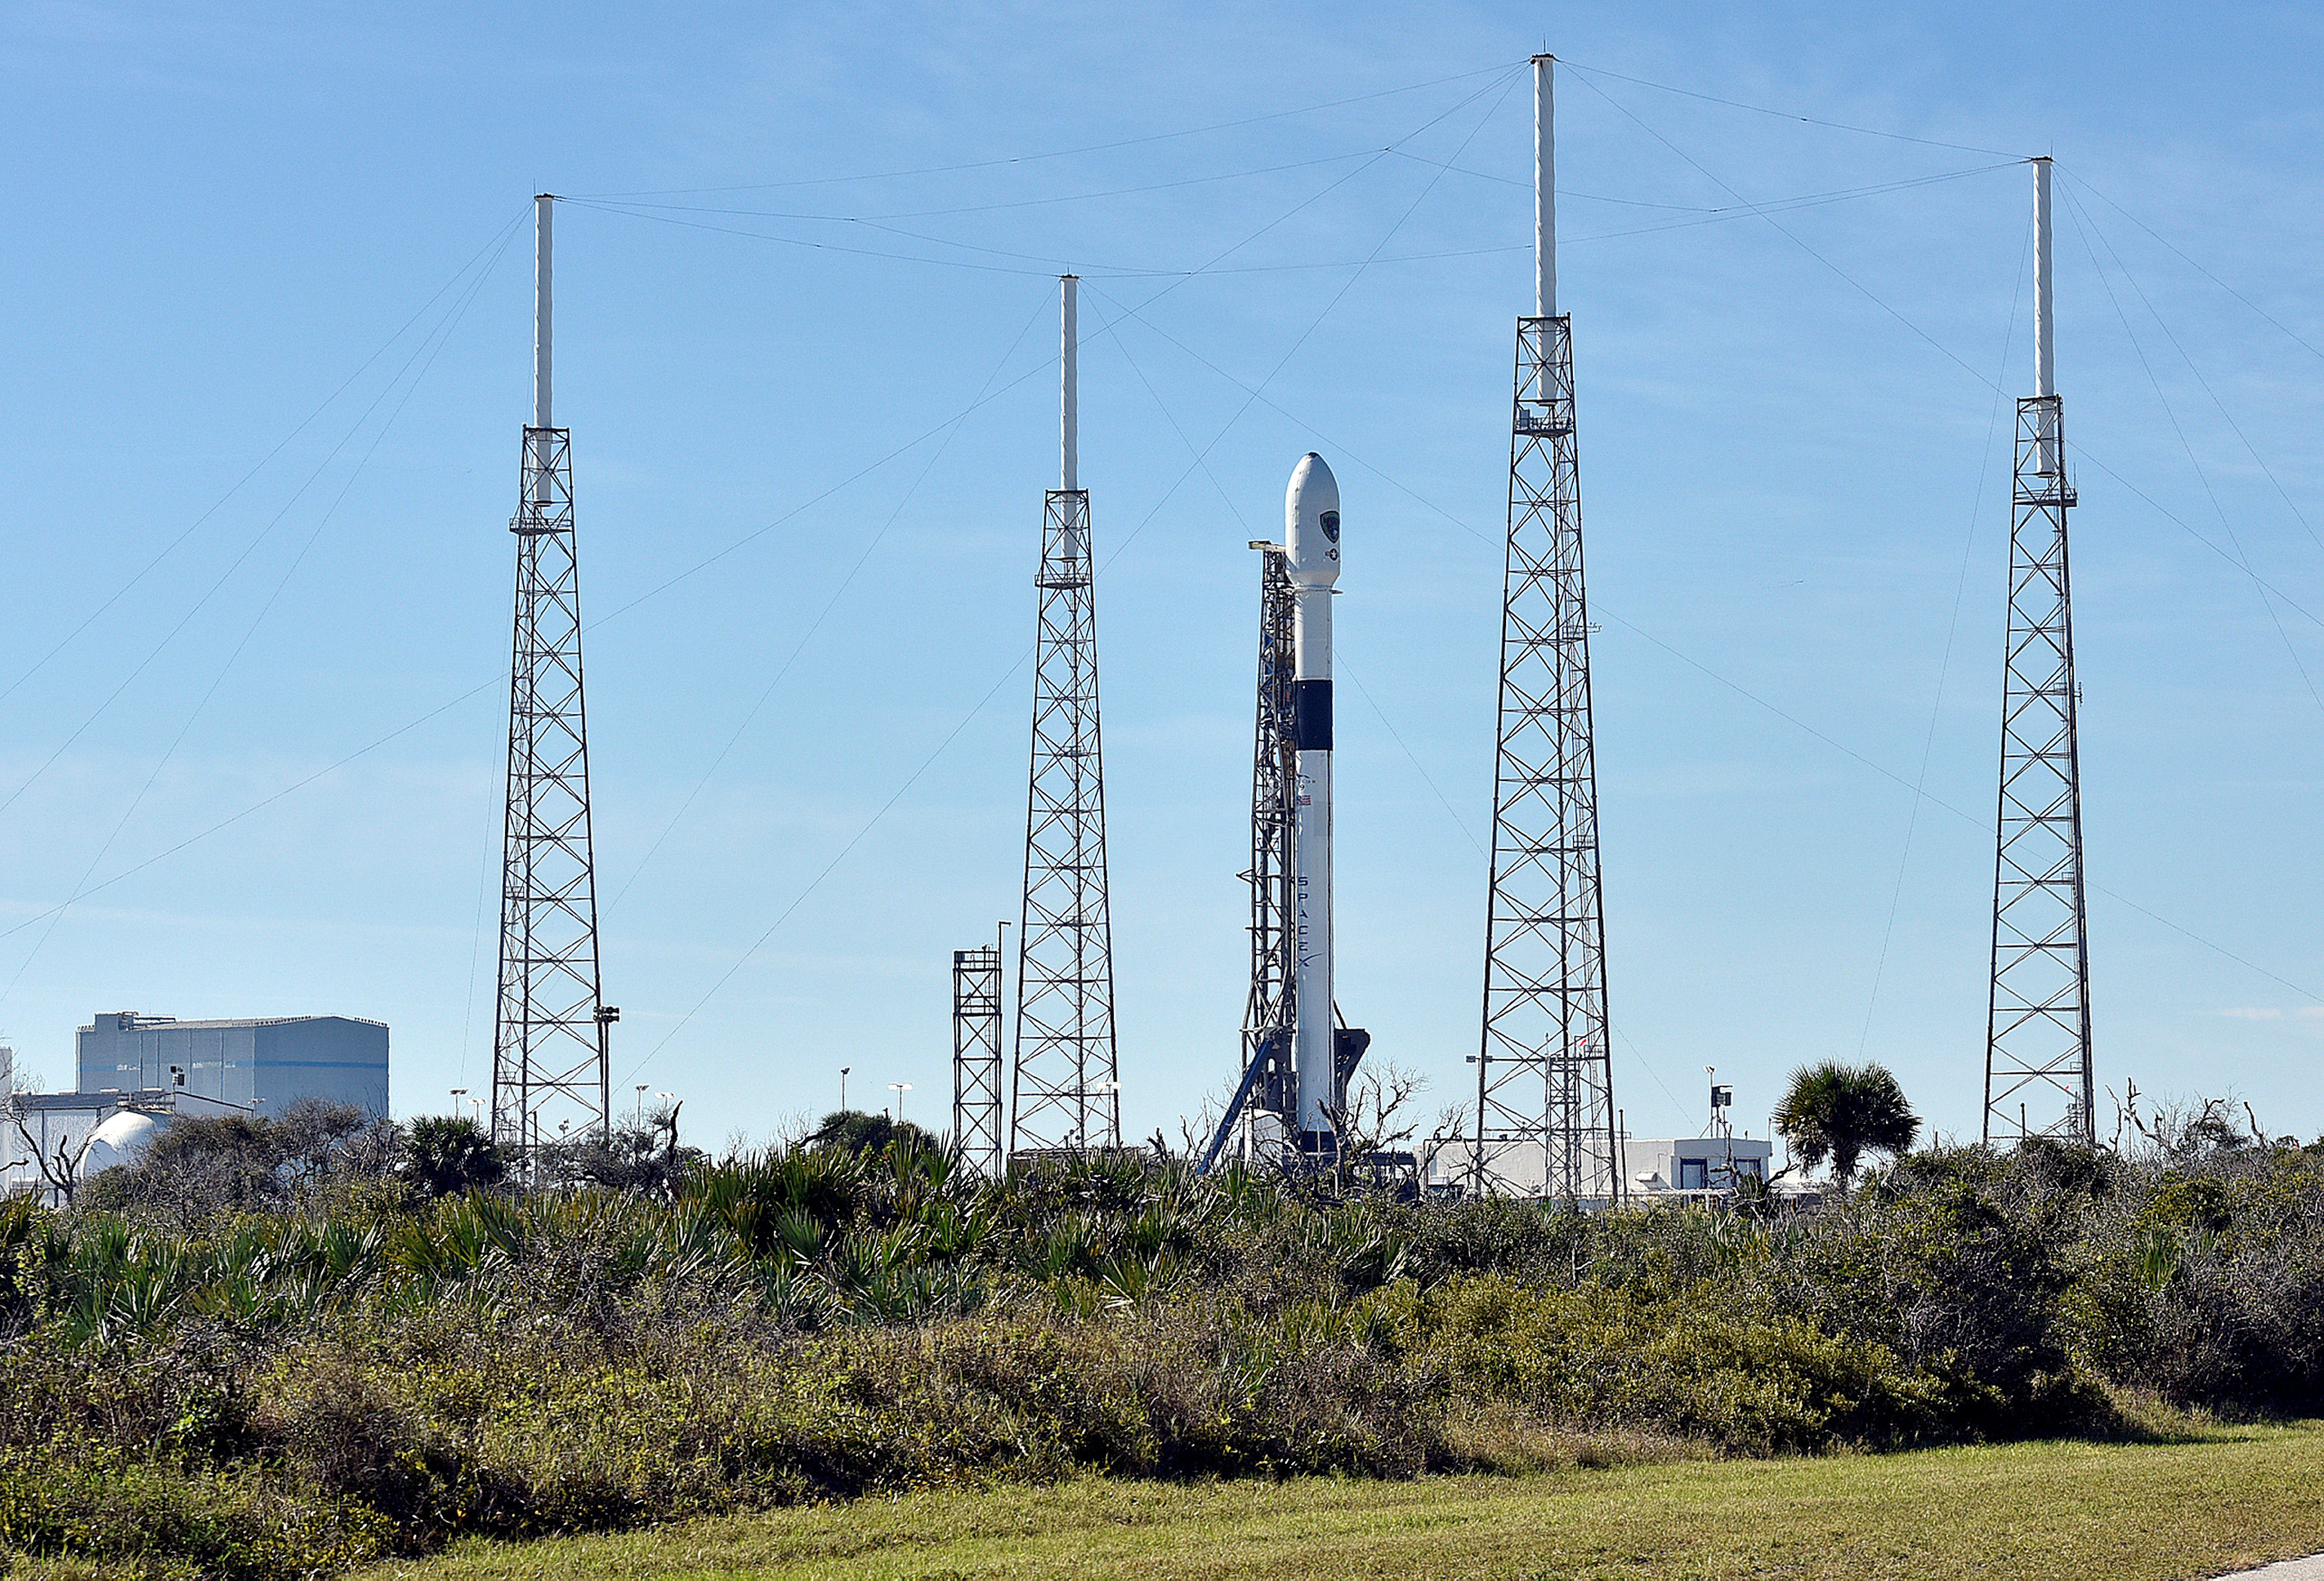 FILE PHOTO: The SpaceX Falcon 9 rocket, scheduled to launch a U.S. Air Force navigation satellite, sits on Launch Complex 40 after the launch was postponed after an abort procedure was triggered by the onboard flight computer, at Cape Canaveral, Florida, U.S., December 18, 2018. REUTERS